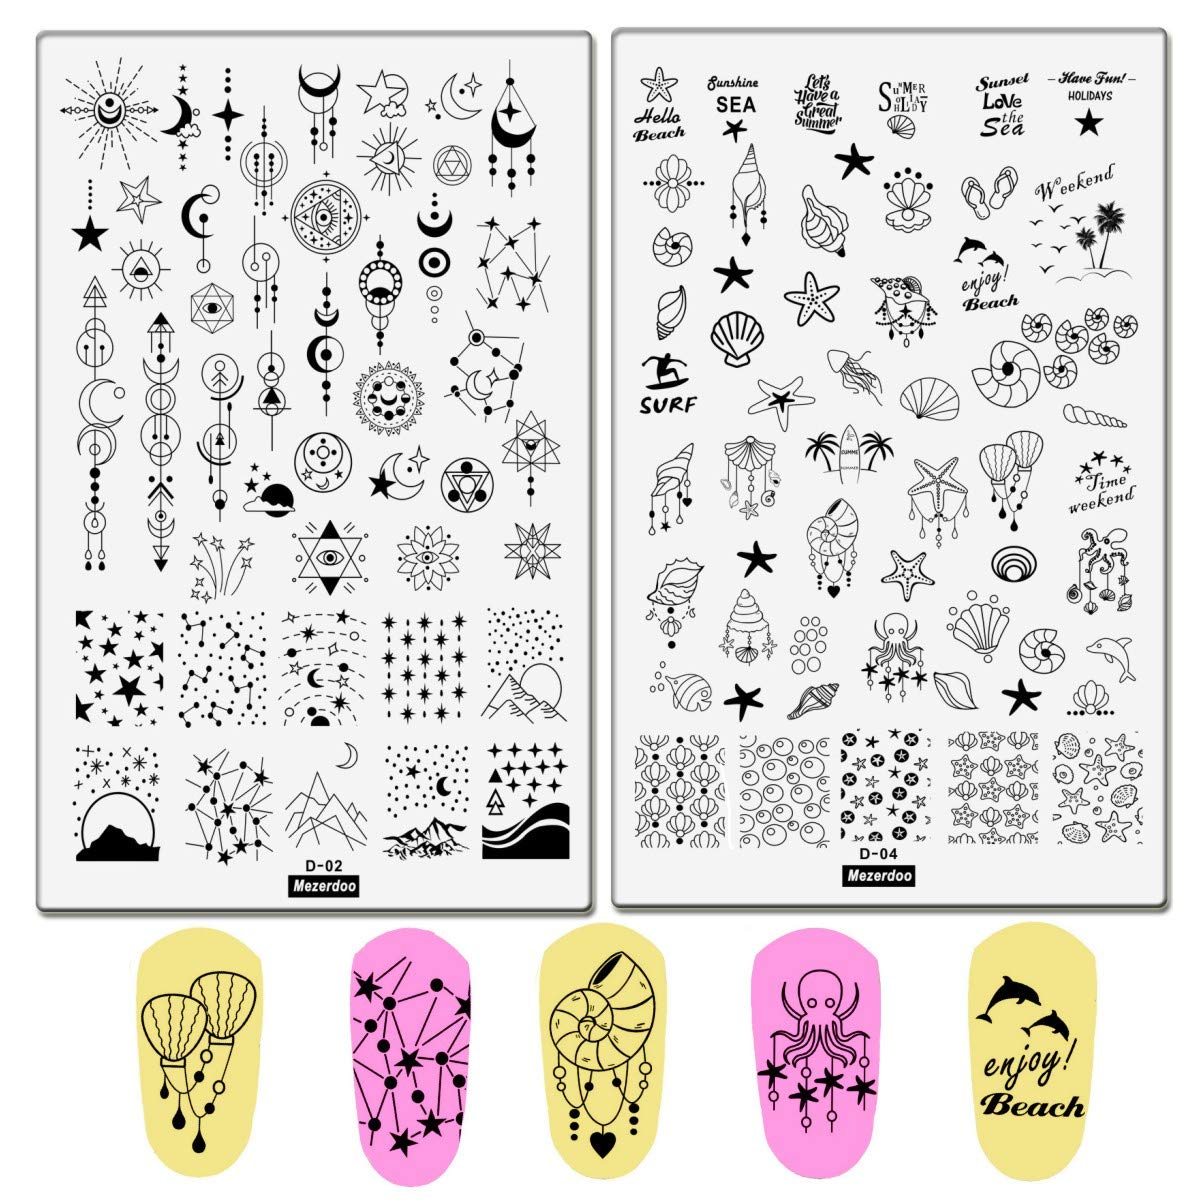 Starry Star Moon Design Stamping Plates Nail Art Kit 2pcs Galaxy Night Sky  Large Stamp Templates Space Planet Stamper Plate Heart Sun Geometry